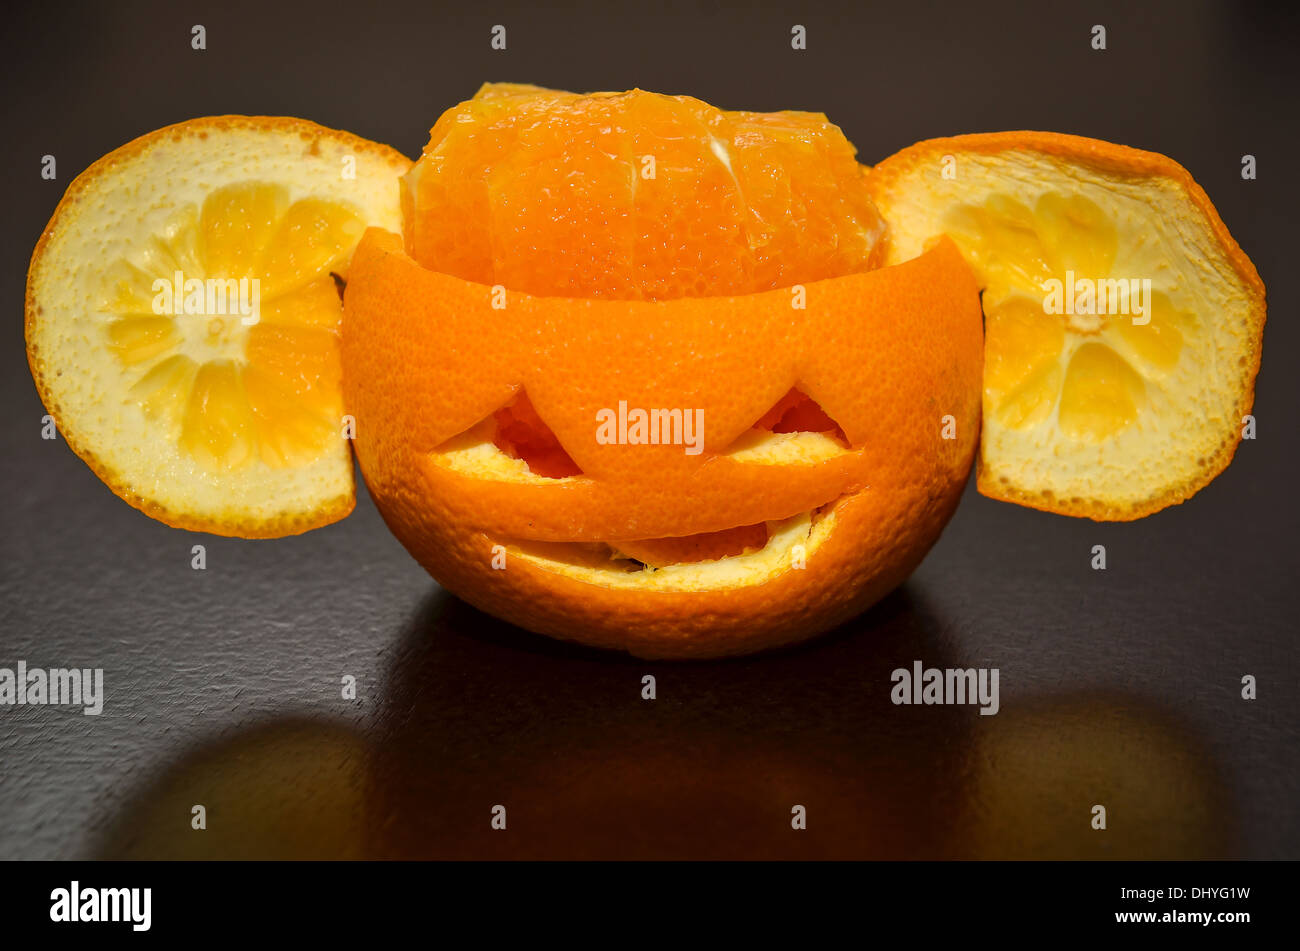 Citrus Orange Fruit Carved As A Pumpkin Face With Ears Stock Photo